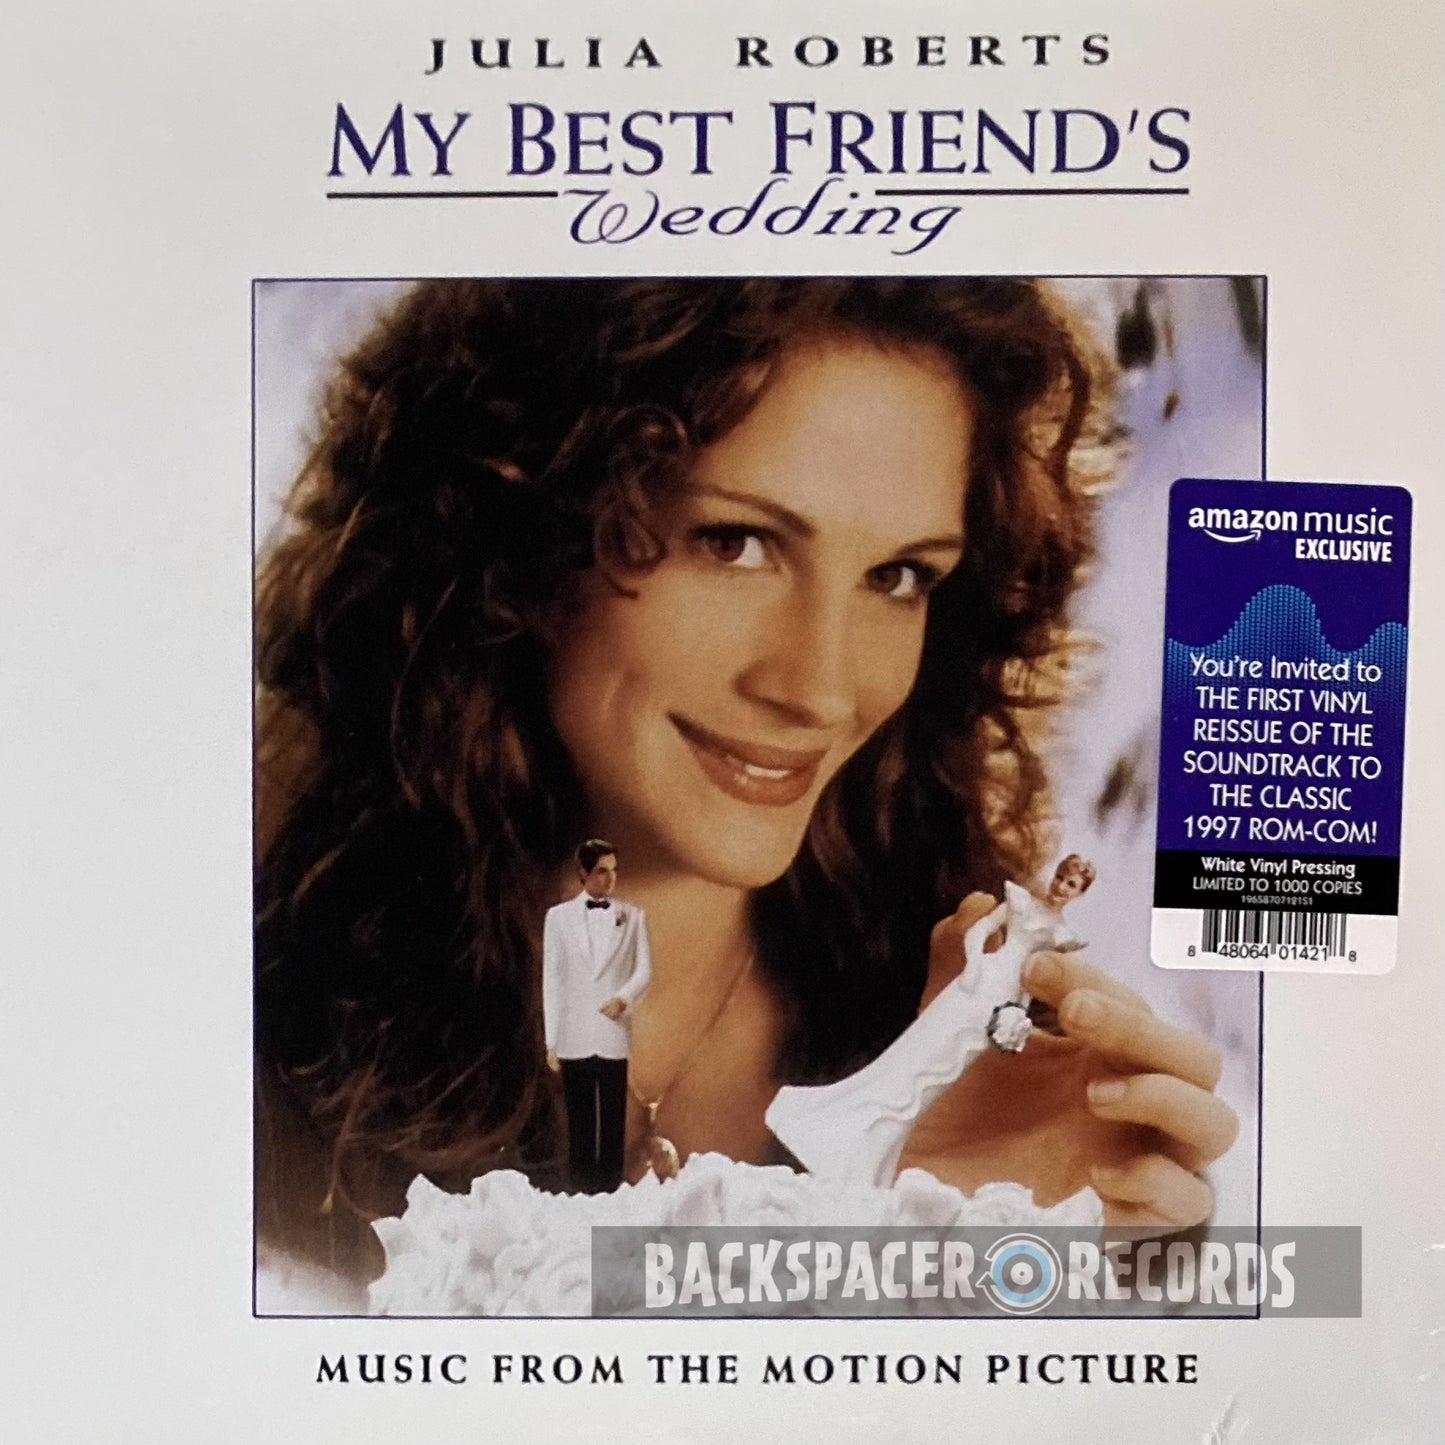 My Best Friend's Wedding: Music From The Motion Picture - Various Artists (Limited Edition) LP (Sealed)